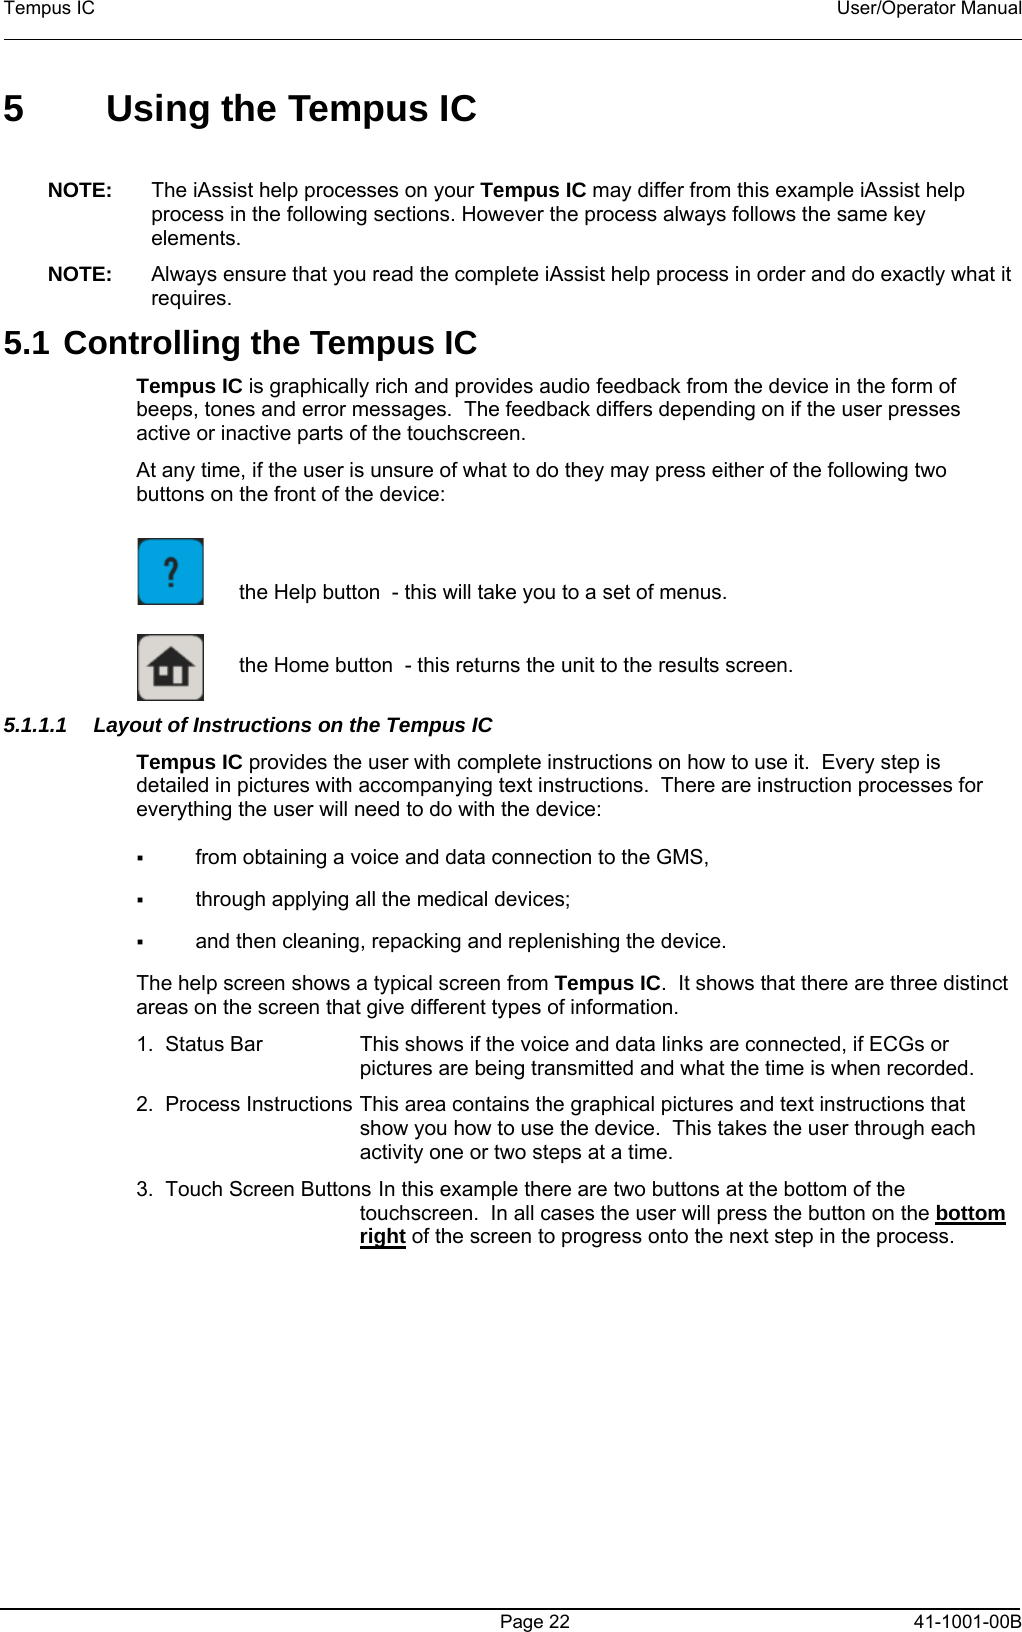 Tempus IC    User/Operator Manual    5  Using the Tempus IC  NOTE:  The iAssist help processes on your Tempus IC may differ from this example iAssist help process in the following sections. However the process always follows the same key elements.   NOTE:  Always ensure that you read the complete iAssist help process in order and do exactly what it requires.  5.1 Controlling the Tempus IC Tempus IC is graphically rich and provides audio feedback from the device in the form of beeps, tones and error messages.  The feedback differs depending on if the user presses active or inactive parts of the touchscreen. At any time, if the user is unsure of what to do they may press either of the following two buttons on the front of the device:       the Help button  - this will take you to a set of menus.       the Home button  - this returns the unit to the results screen.     5.1.1.1  Layout of Instructions on the Tempus IC Tempus IC provides the user with complete instructions on how to use it.  Every step is detailed in pictures with accompanying text instructions.  There are instruction processes for everything the user will need to do with the device:   from obtaining a voice and data connection to the GMS,   through applying all the medical devices;   and then cleaning, repacking and replenishing the device. The help screen shows a typical screen from Tempus IC.  It shows that there are three distinct areas on the screen that give different types of information. 1.  Status Bar   This shows if the voice and data links are connected, if ECGs or pictures are being transmitted and what the time is when recorded. 2.  Process Instructions  This area contains the graphical pictures and text instructions that show you how to use the device.  This takes the user through each activity one or two steps at a time. 3.  Touch Screen Buttons  In this example there are two buttons at the bottom of the touchscreen.  In all cases the user will press the button on the bottom right of the screen to progress onto the next step in the process.       Page 22   41-1001-00B 